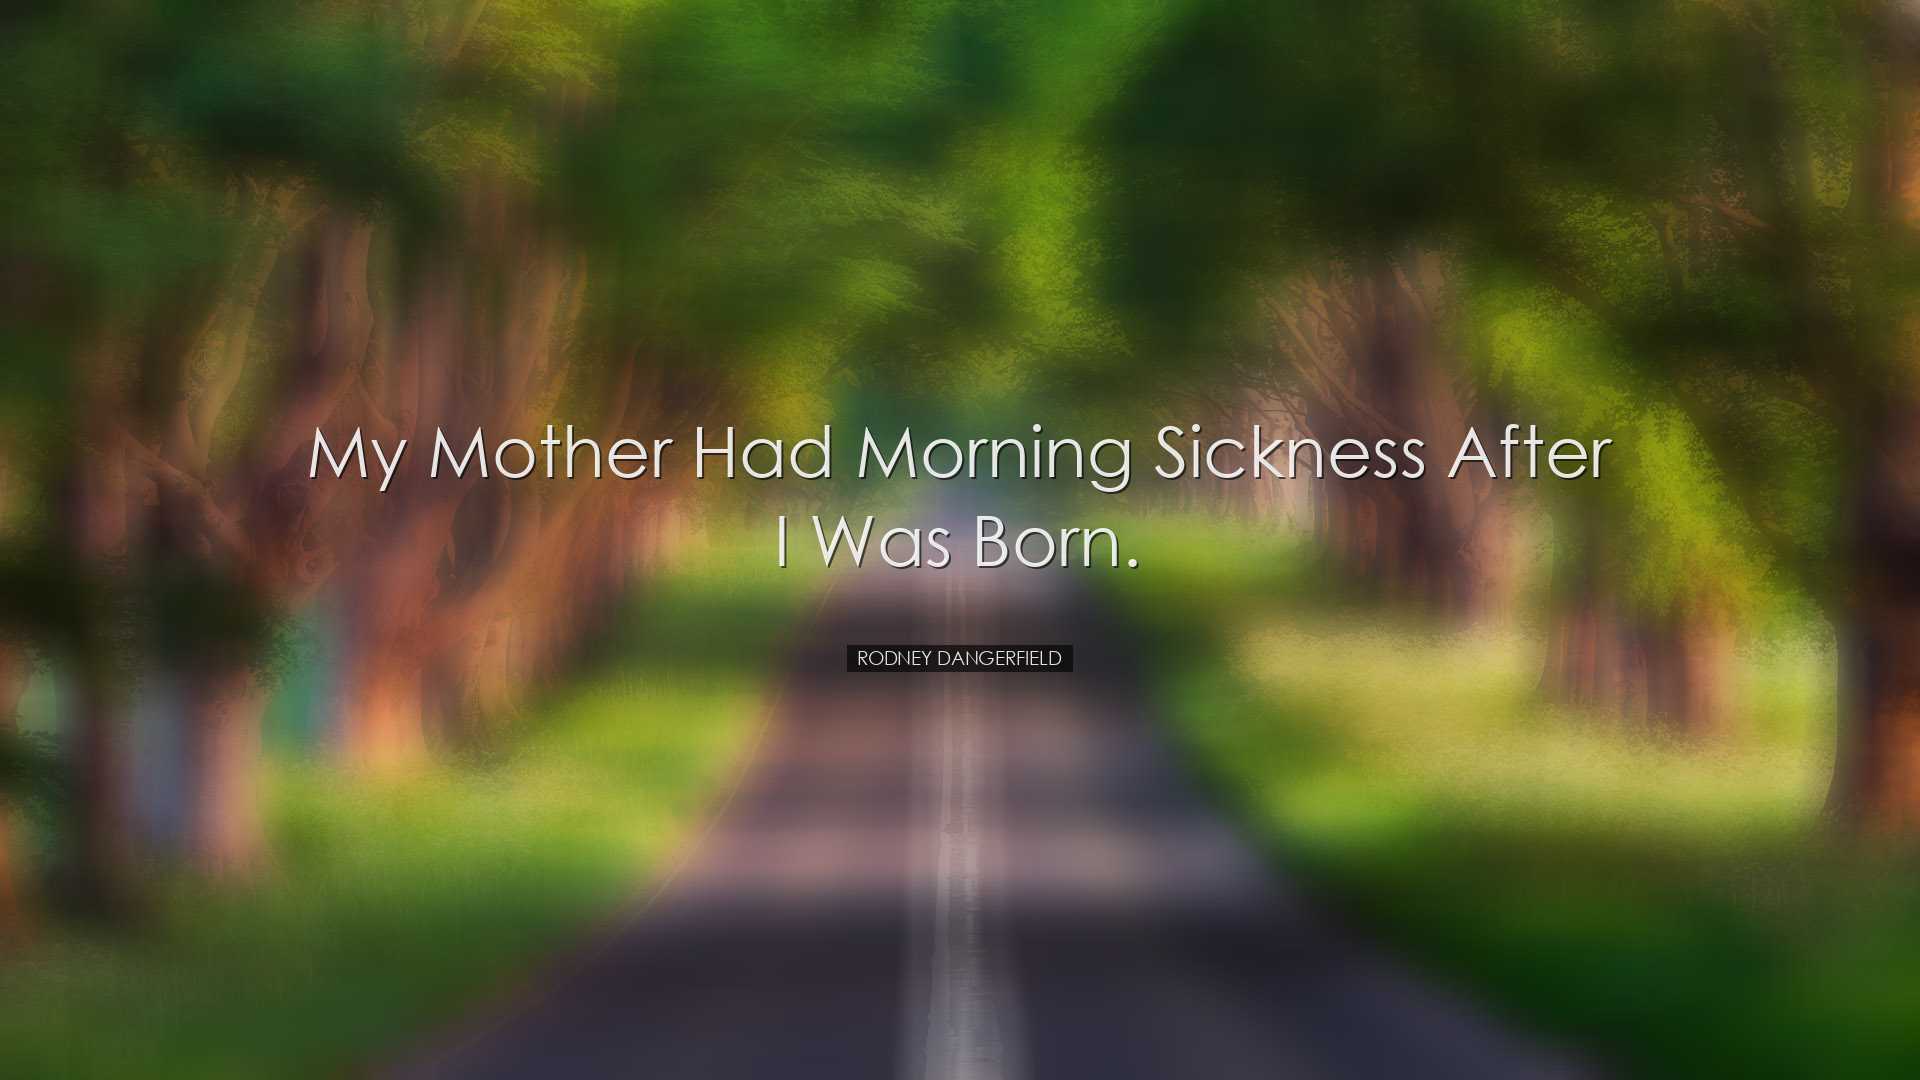 My mother had morning sickness after I was born. - Rodney Dangerfi